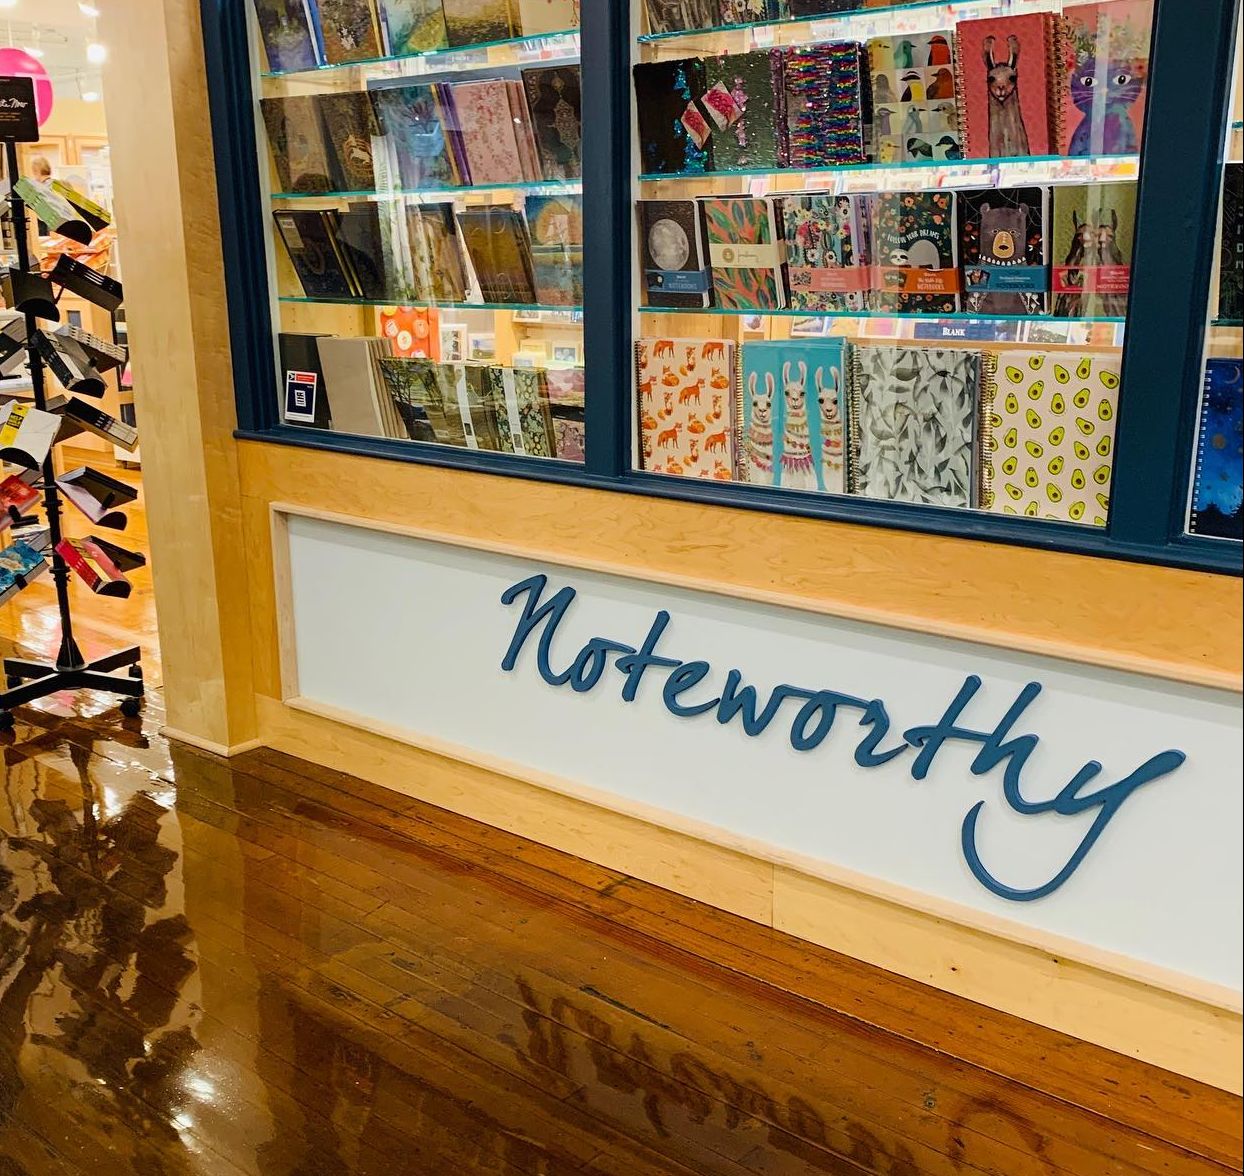 Noteworthy in Thornes sells an array of goods, from greeting cards to journals to arts & crafts goodies.